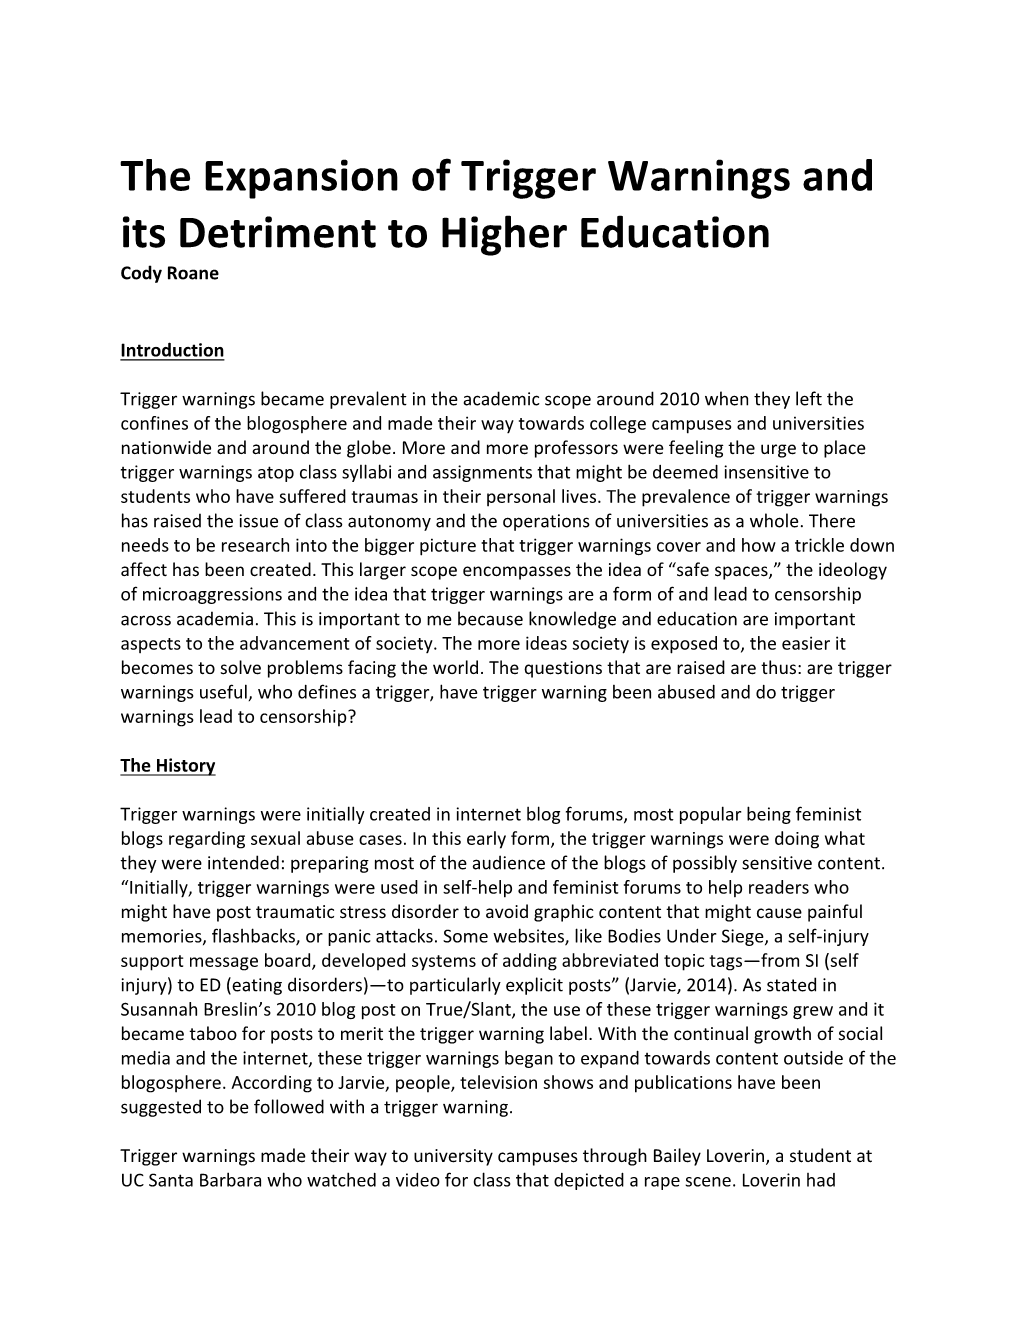 The Expansion of Trigger Warnings and Its Detriment to Higher Education Cody Roane